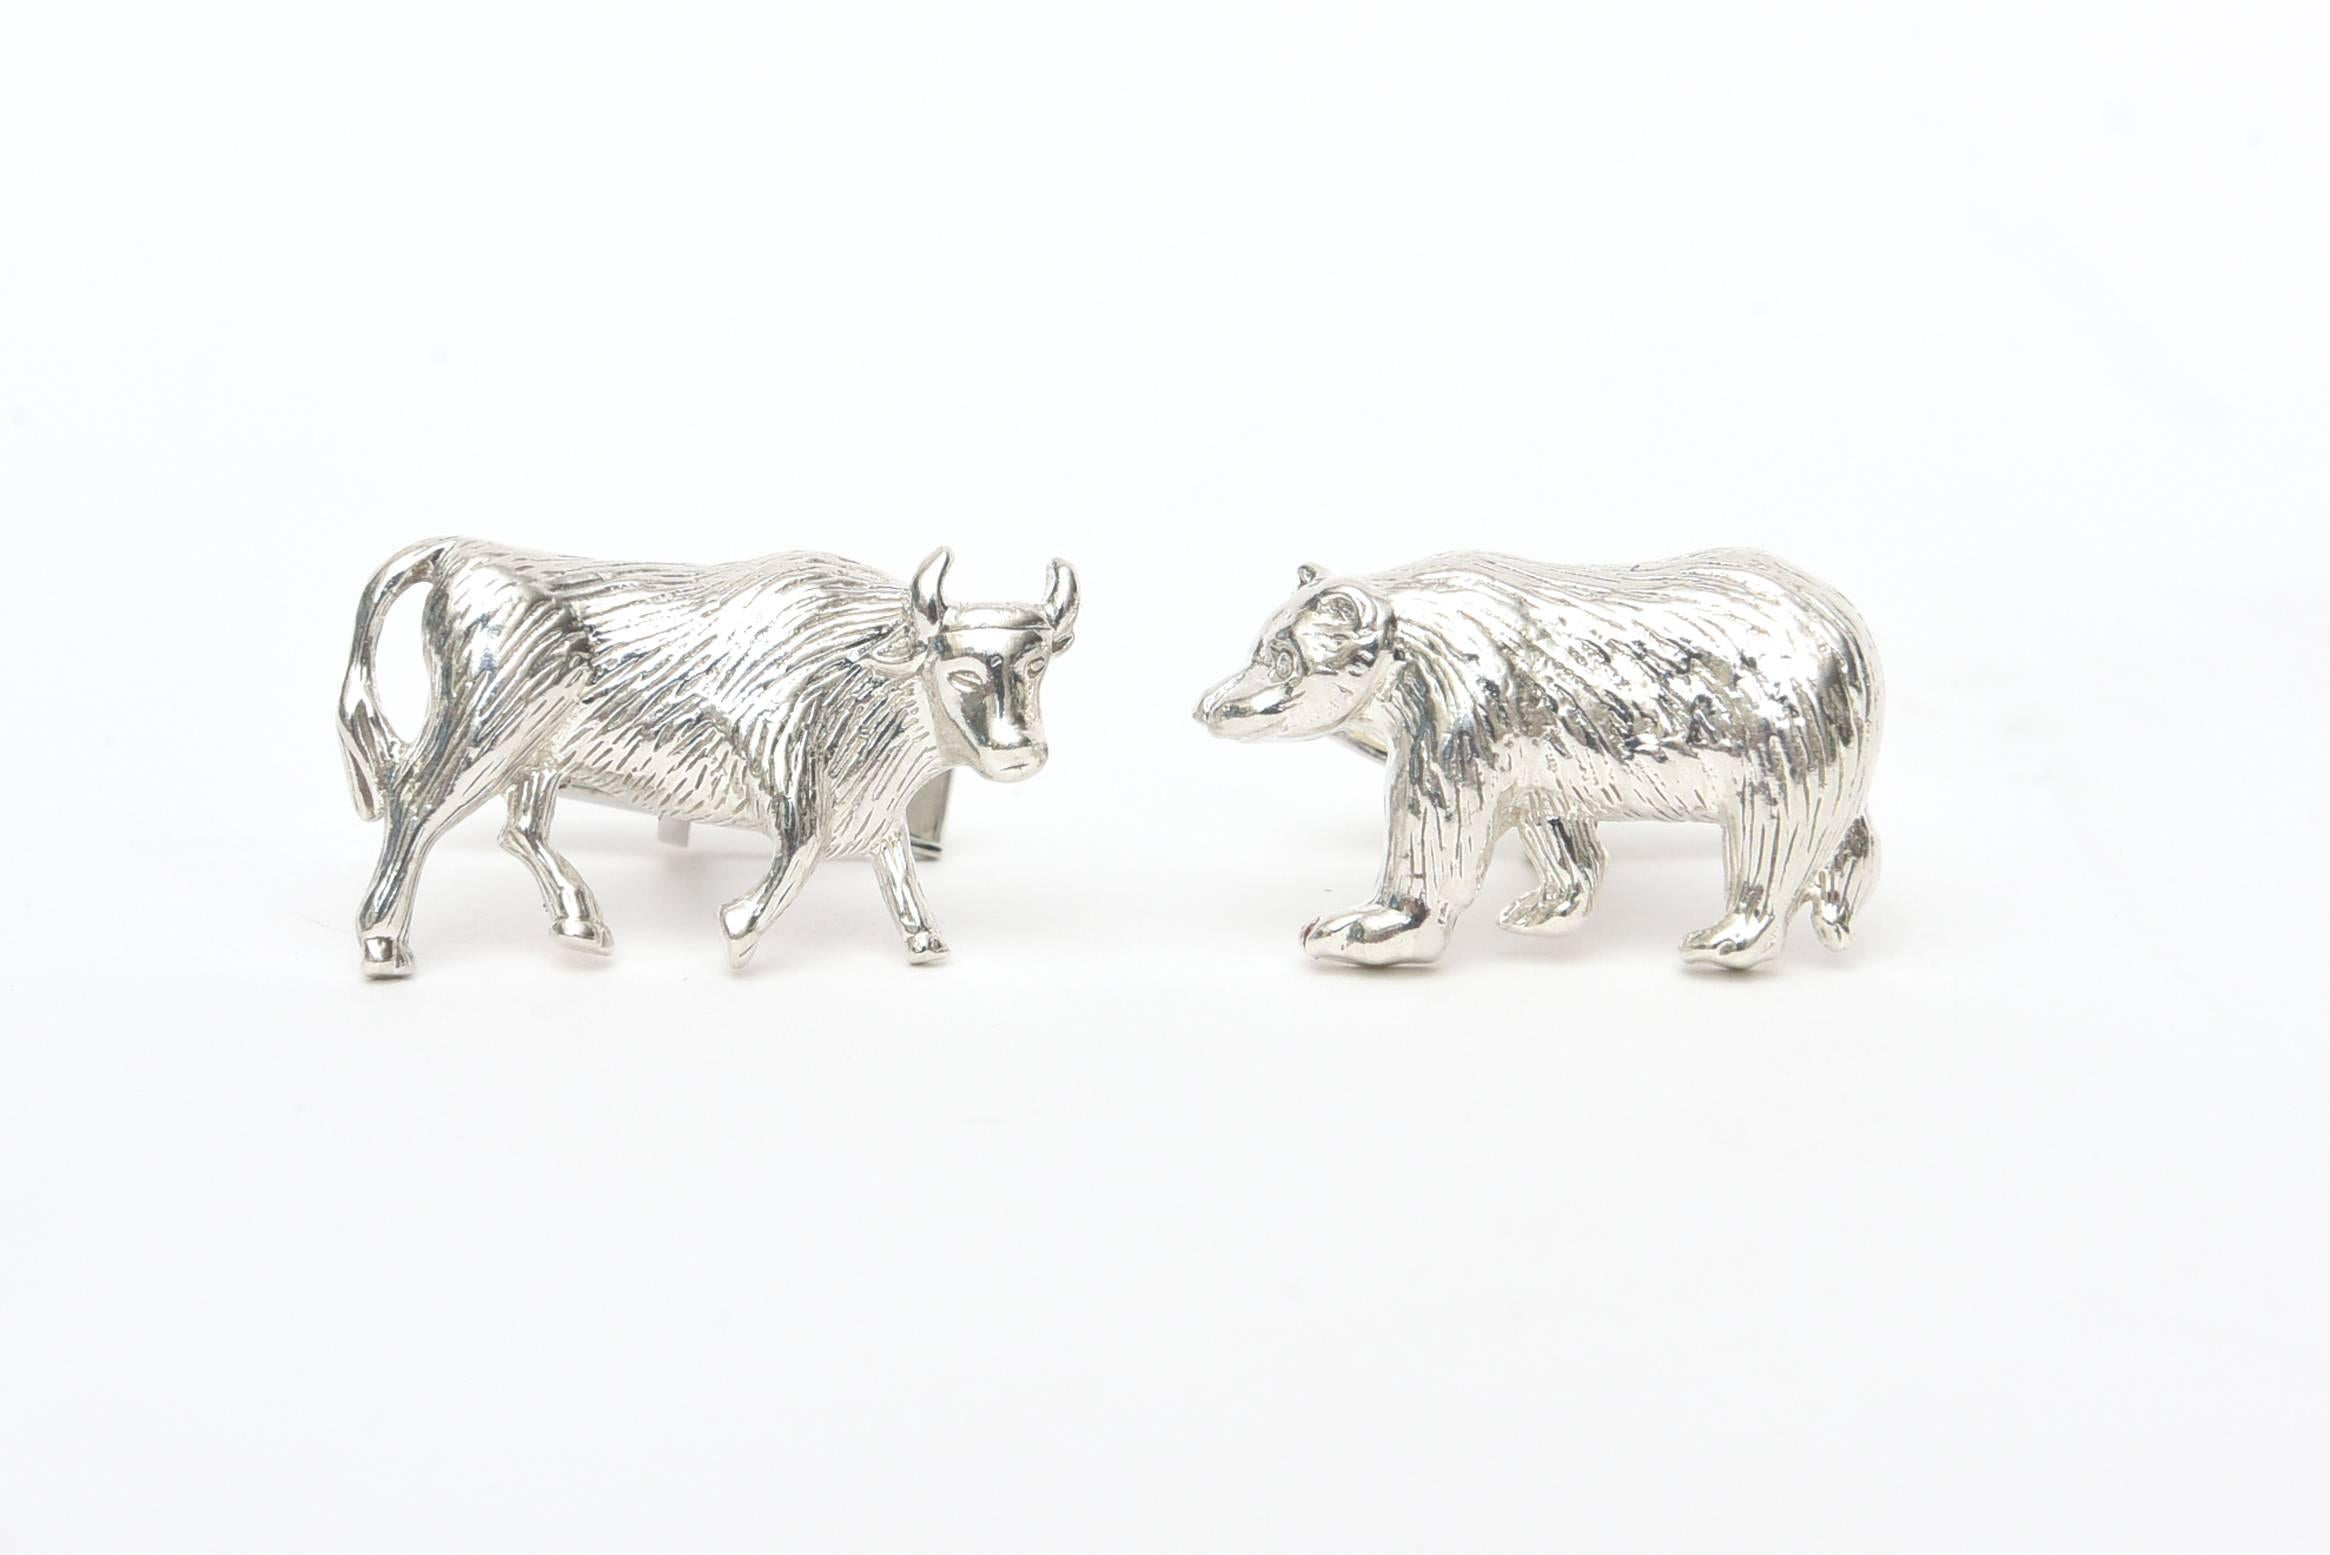 These Sterling Silver bull and bear cuff links are so Wall Street, perfect for those men or women involved in commodities. They were manufactured by a Jeweler named DaVinci. They are jeweler made. They are signed DaVinci Sterling 925. Be it a bull